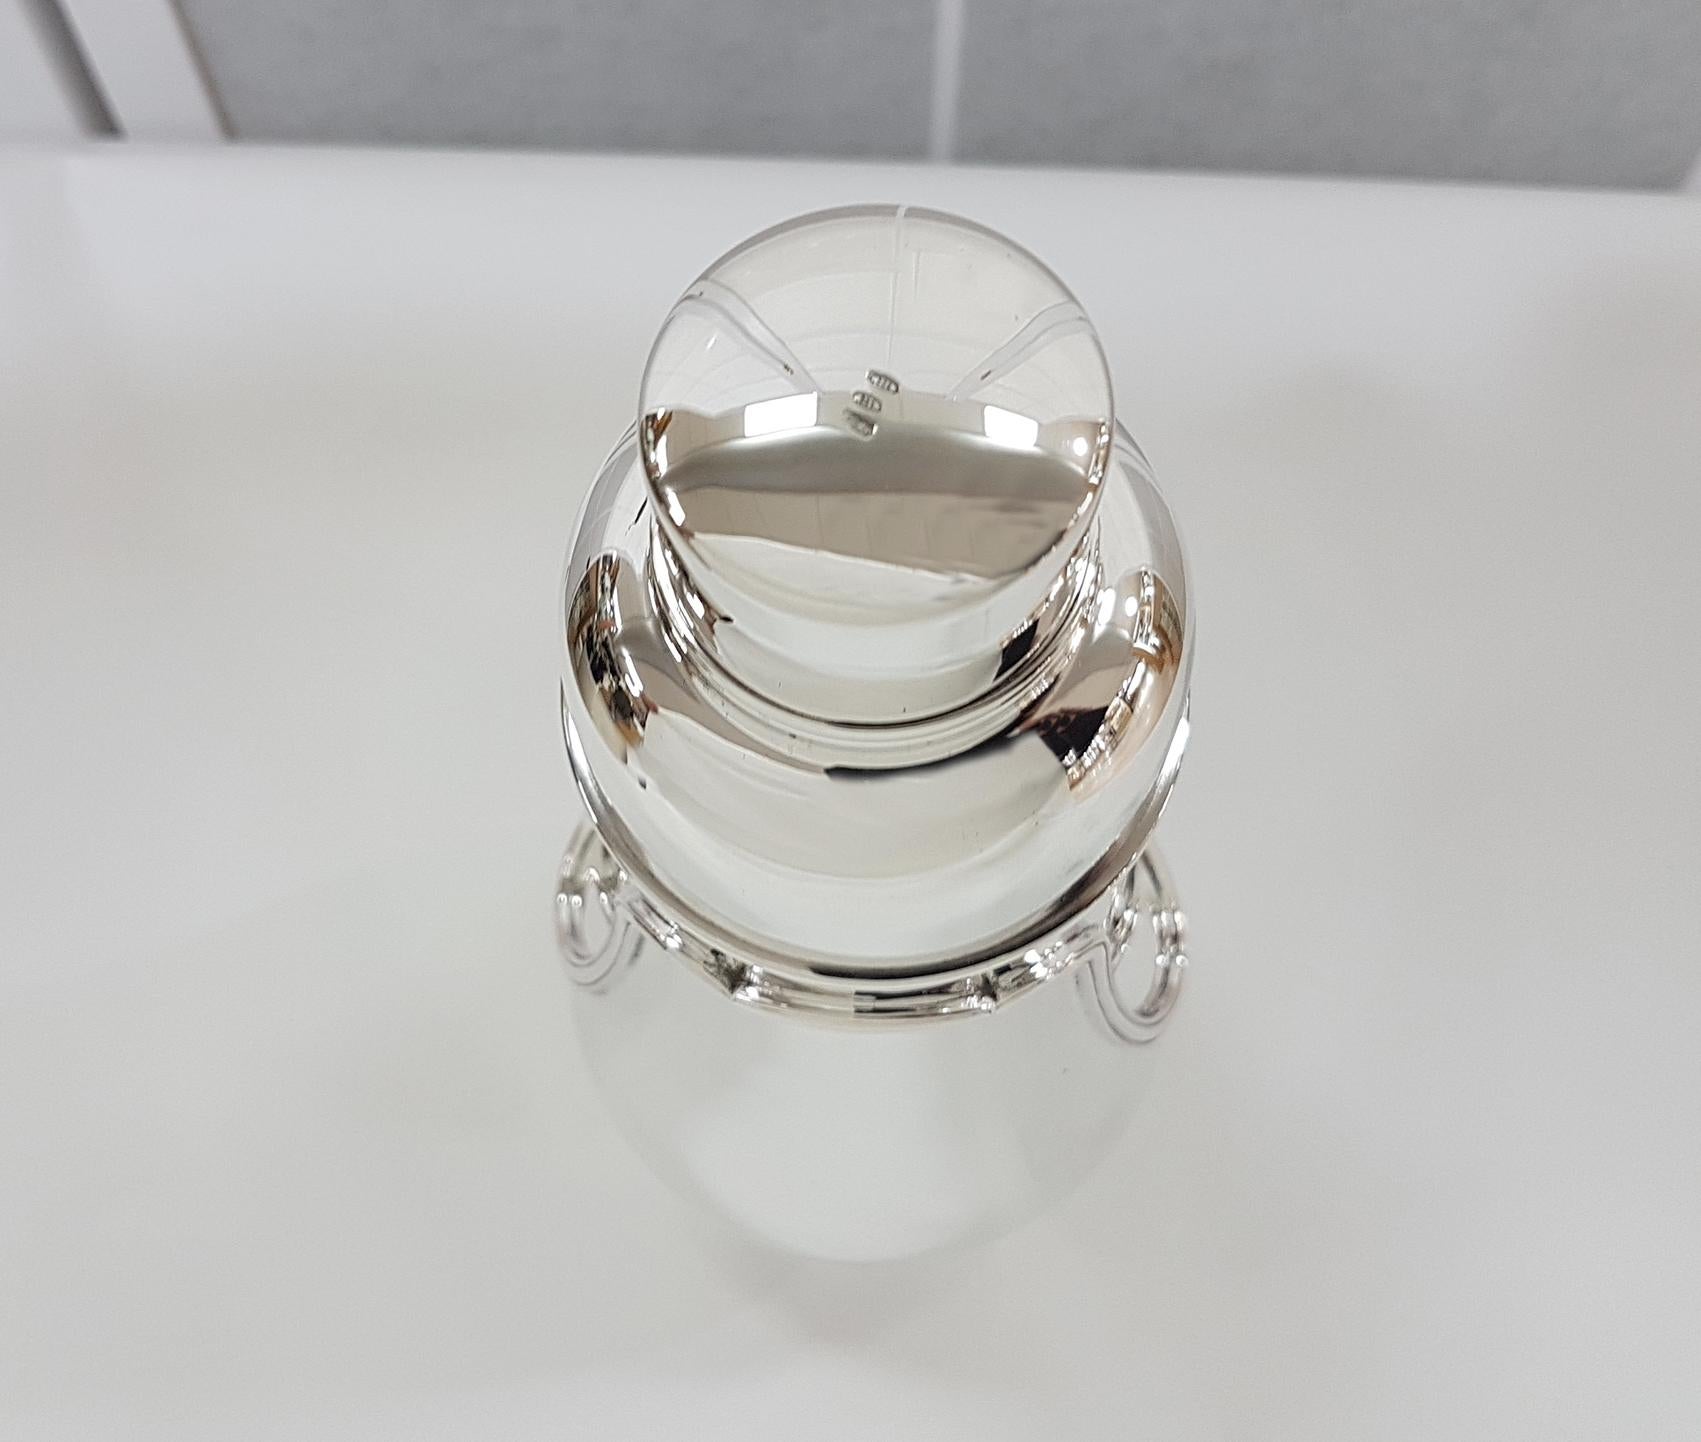 Solid silver shaker.
Round base and a silver border is applied by welding to the body of the object to delineate the Italian style 